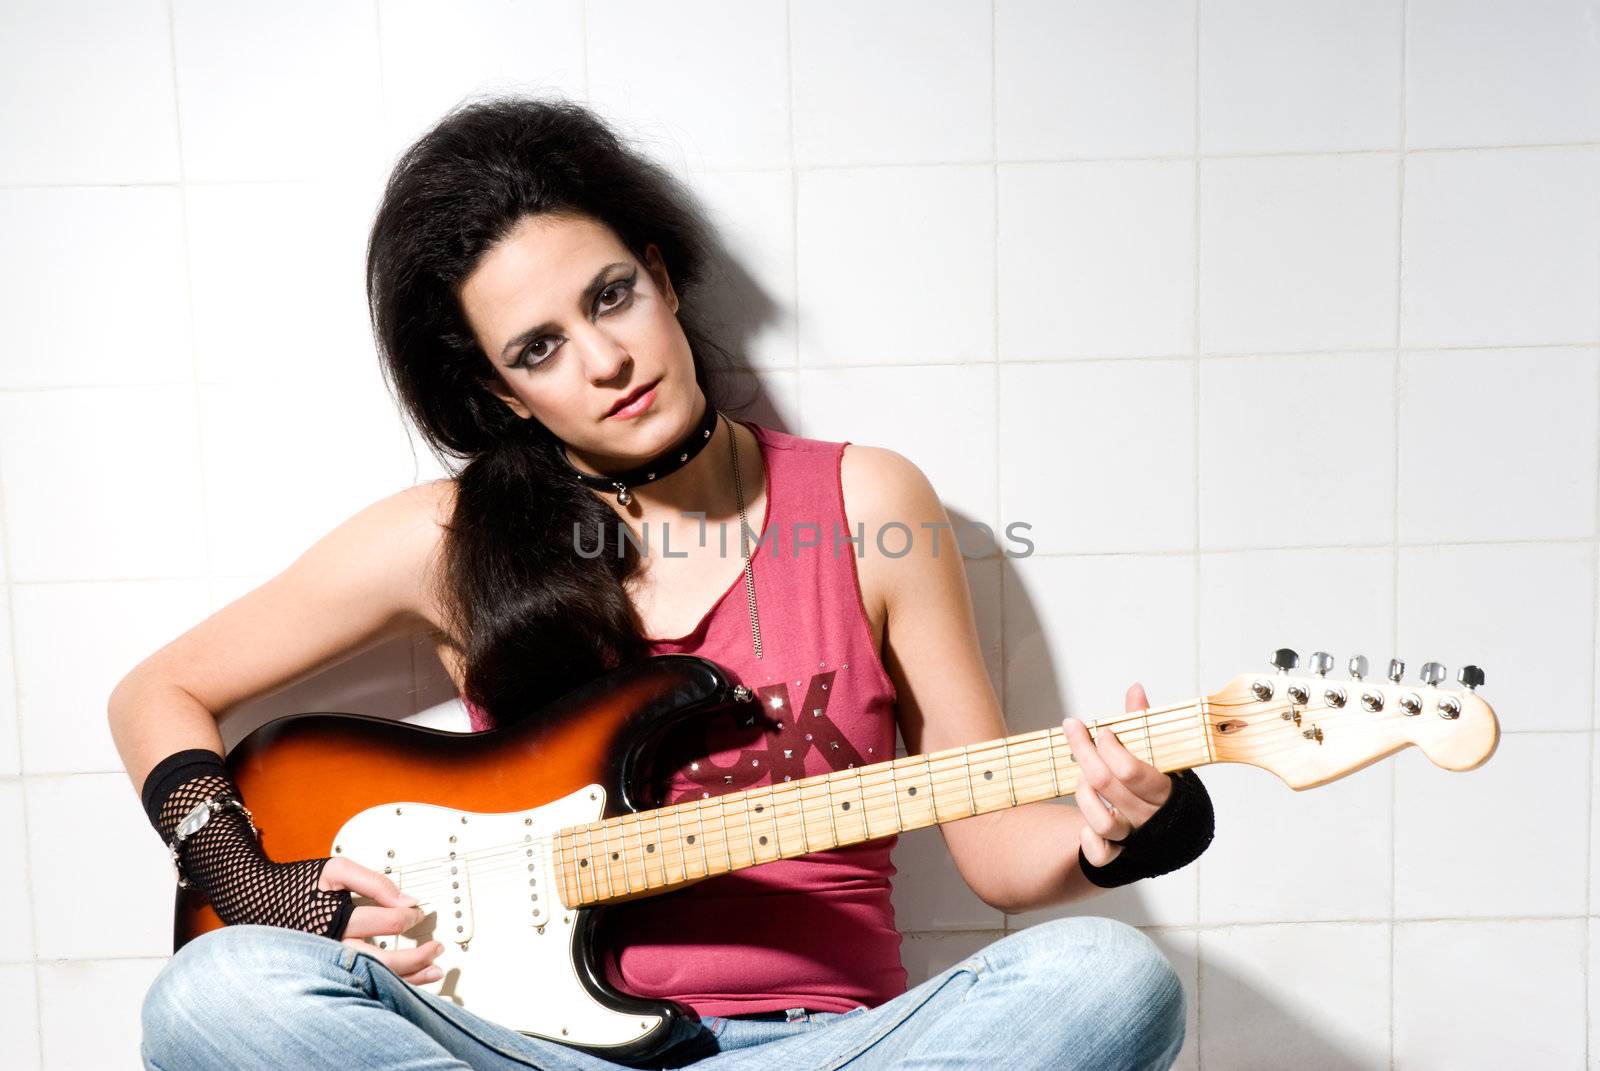 Female playing electric guitar by dgmata